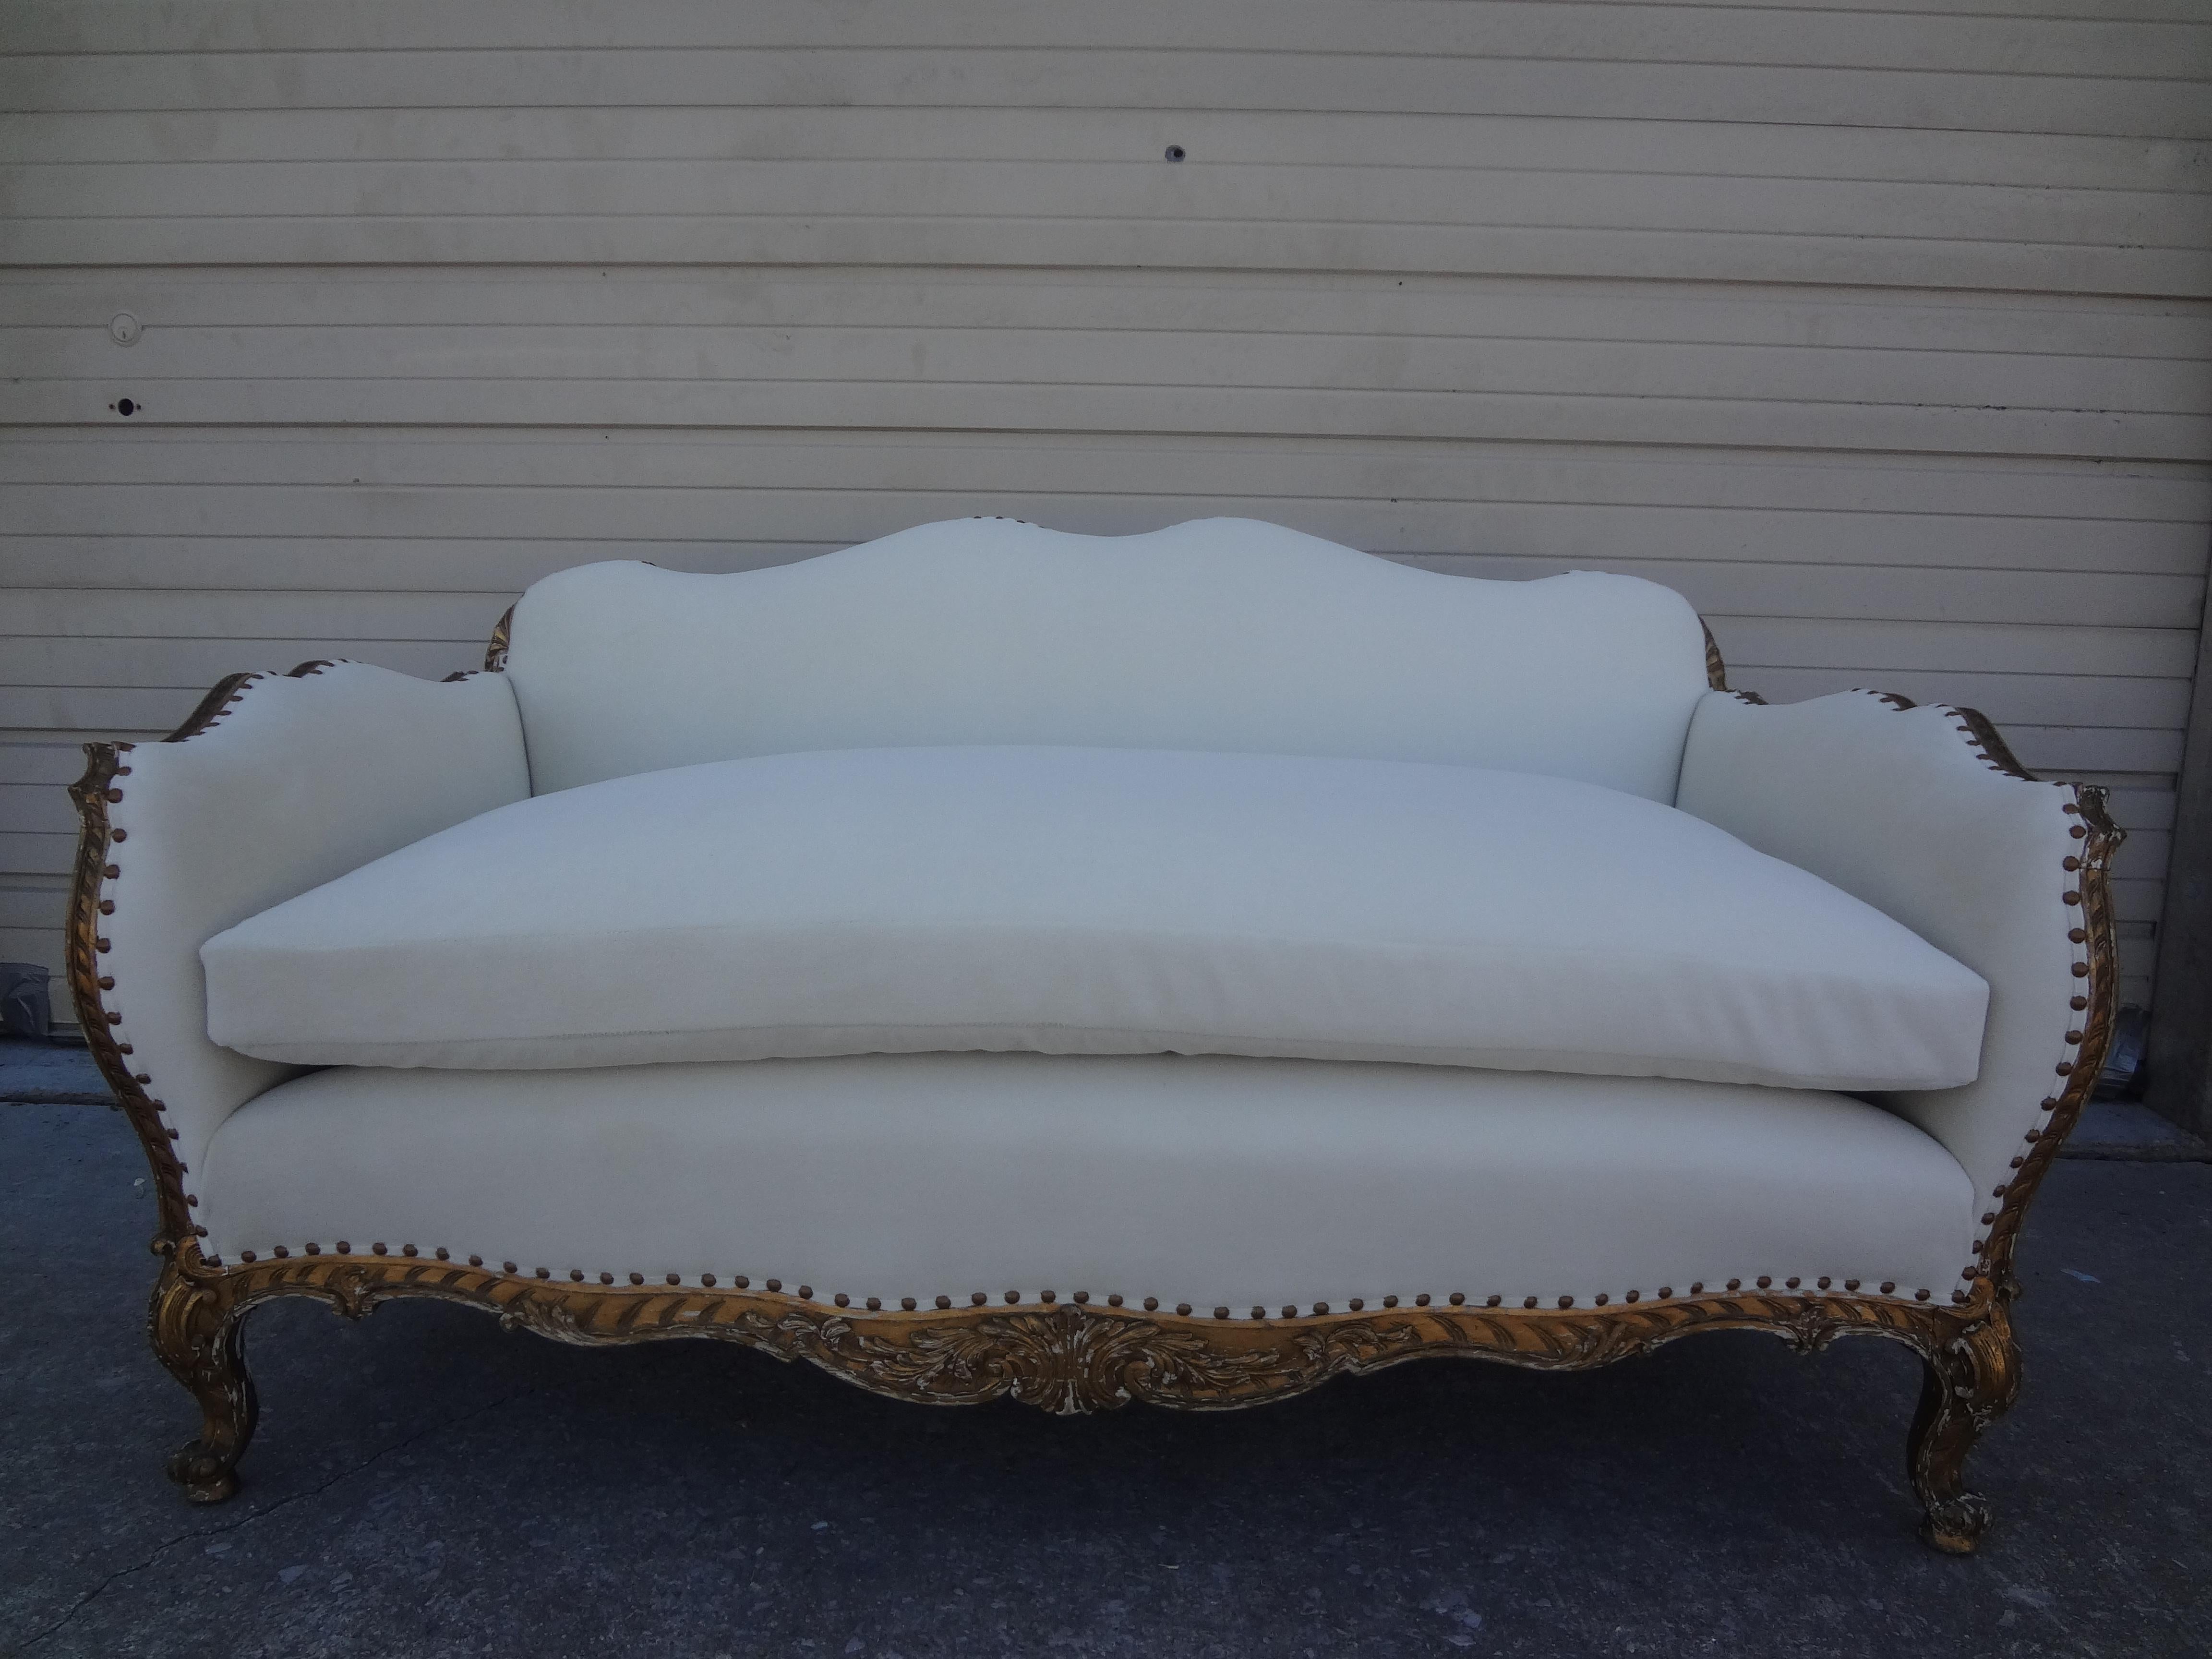 19th century French Régence style giltwood loveseat or sofa. This stunning most unusual antique French Regence style or Napoleon III gilt wood loveseat, canape or sofa has been professionally upholstered in a plush white low pile mohair type fabric.